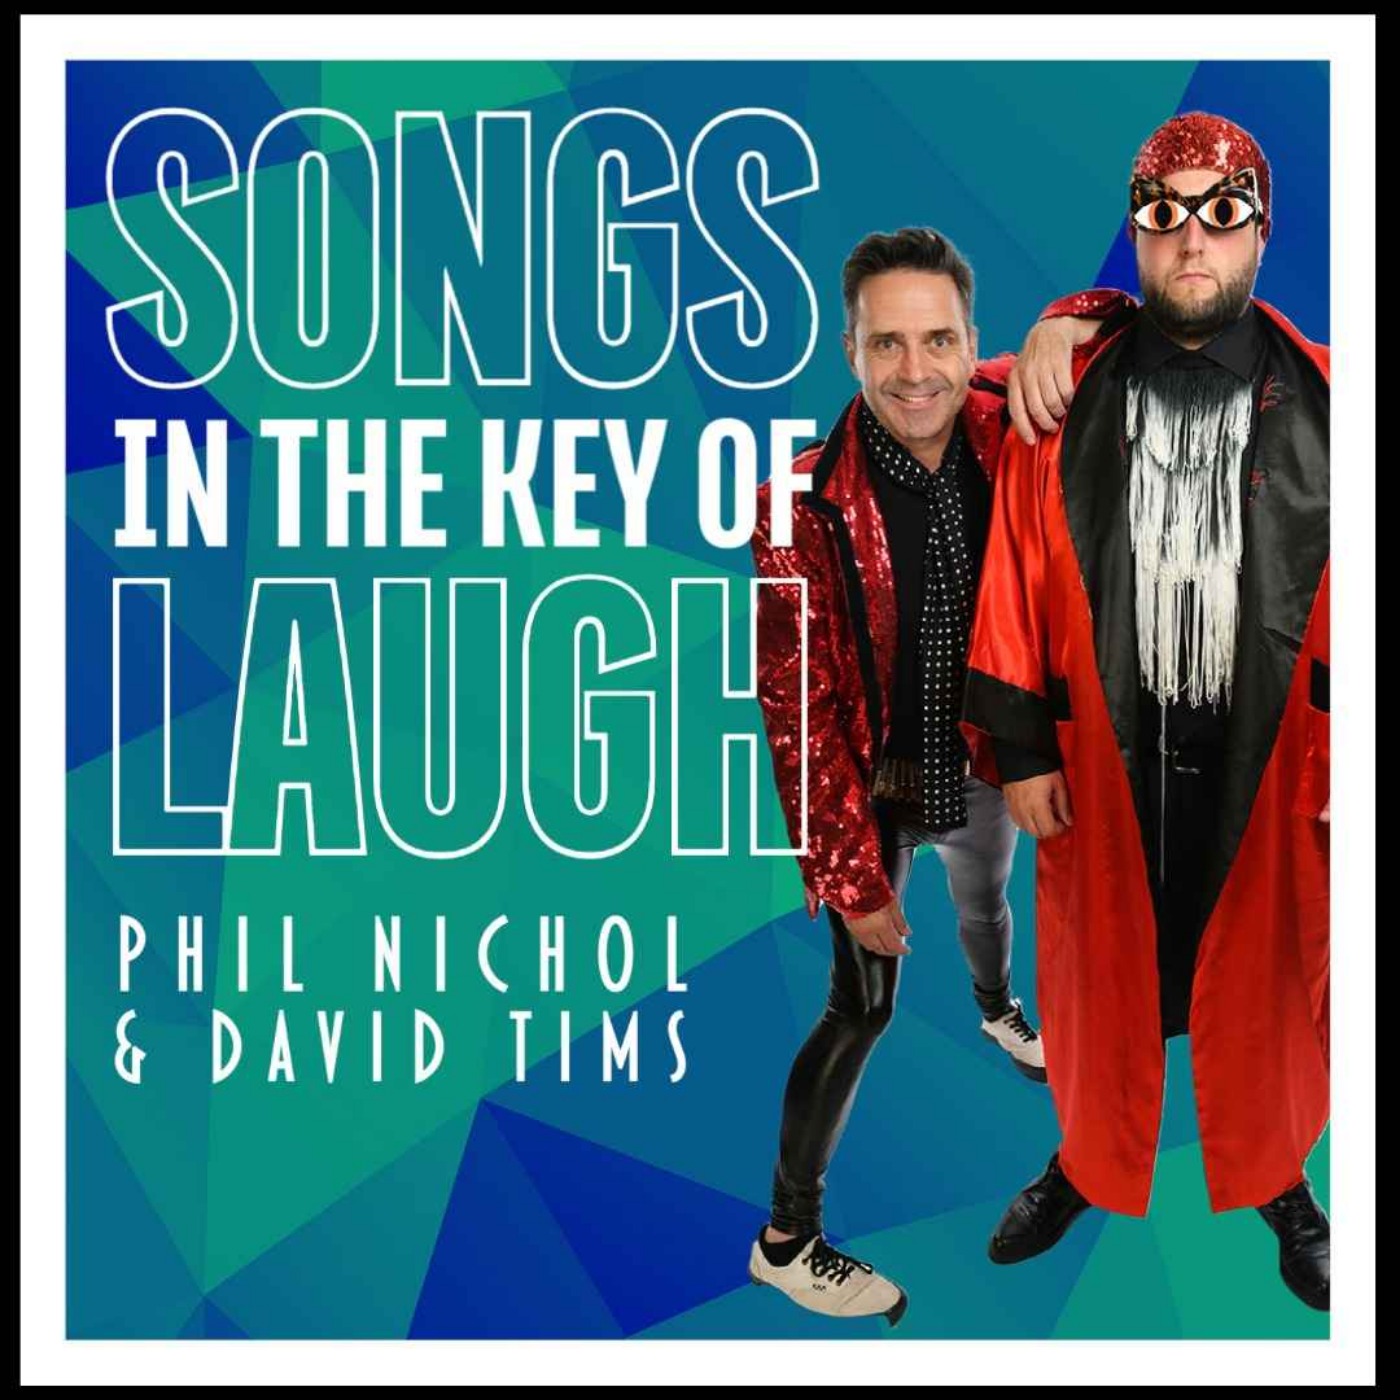 Songs In The Key Of Laugh SERIES 2 COMING SOON